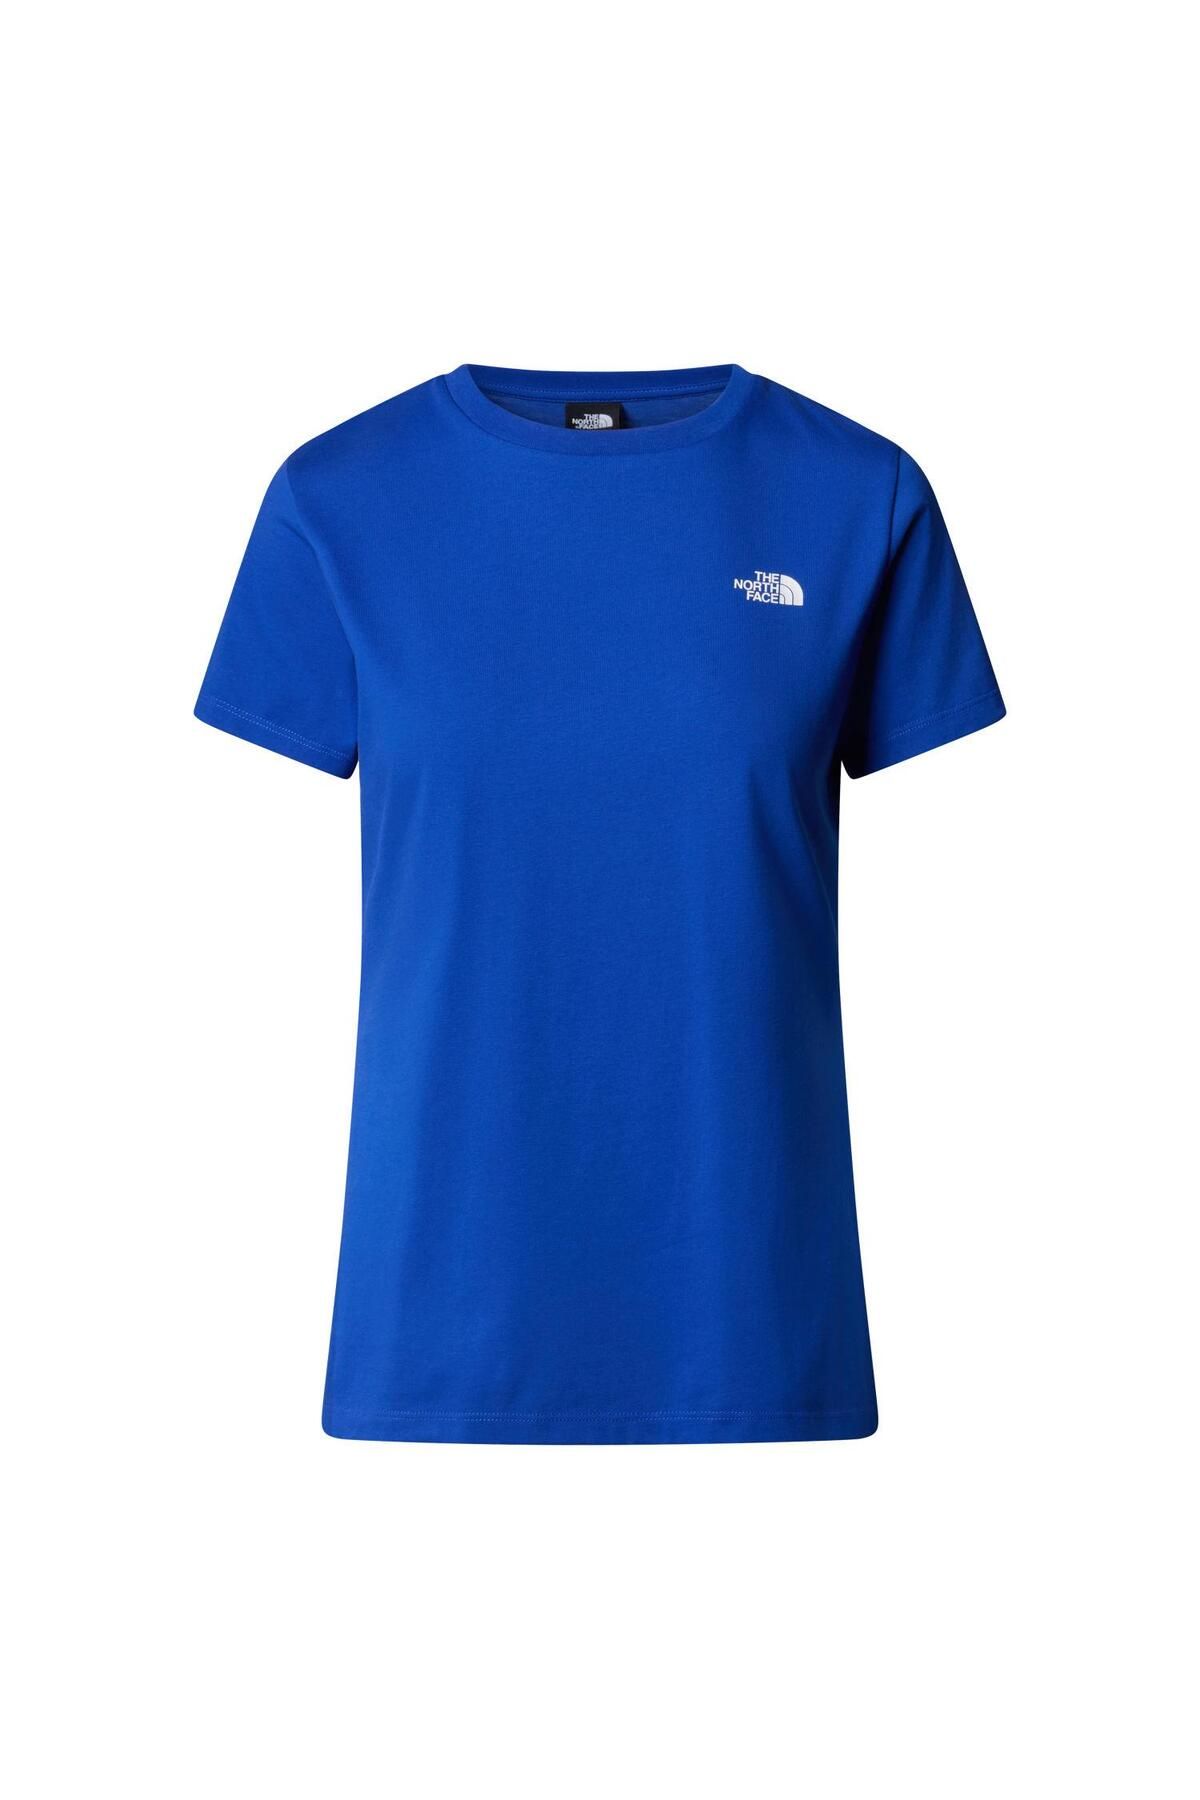 The North Face W S/S SIMPLE DOME SLIM TEE  T-Shirt NF0A87NHCZ61 Mavi-XS